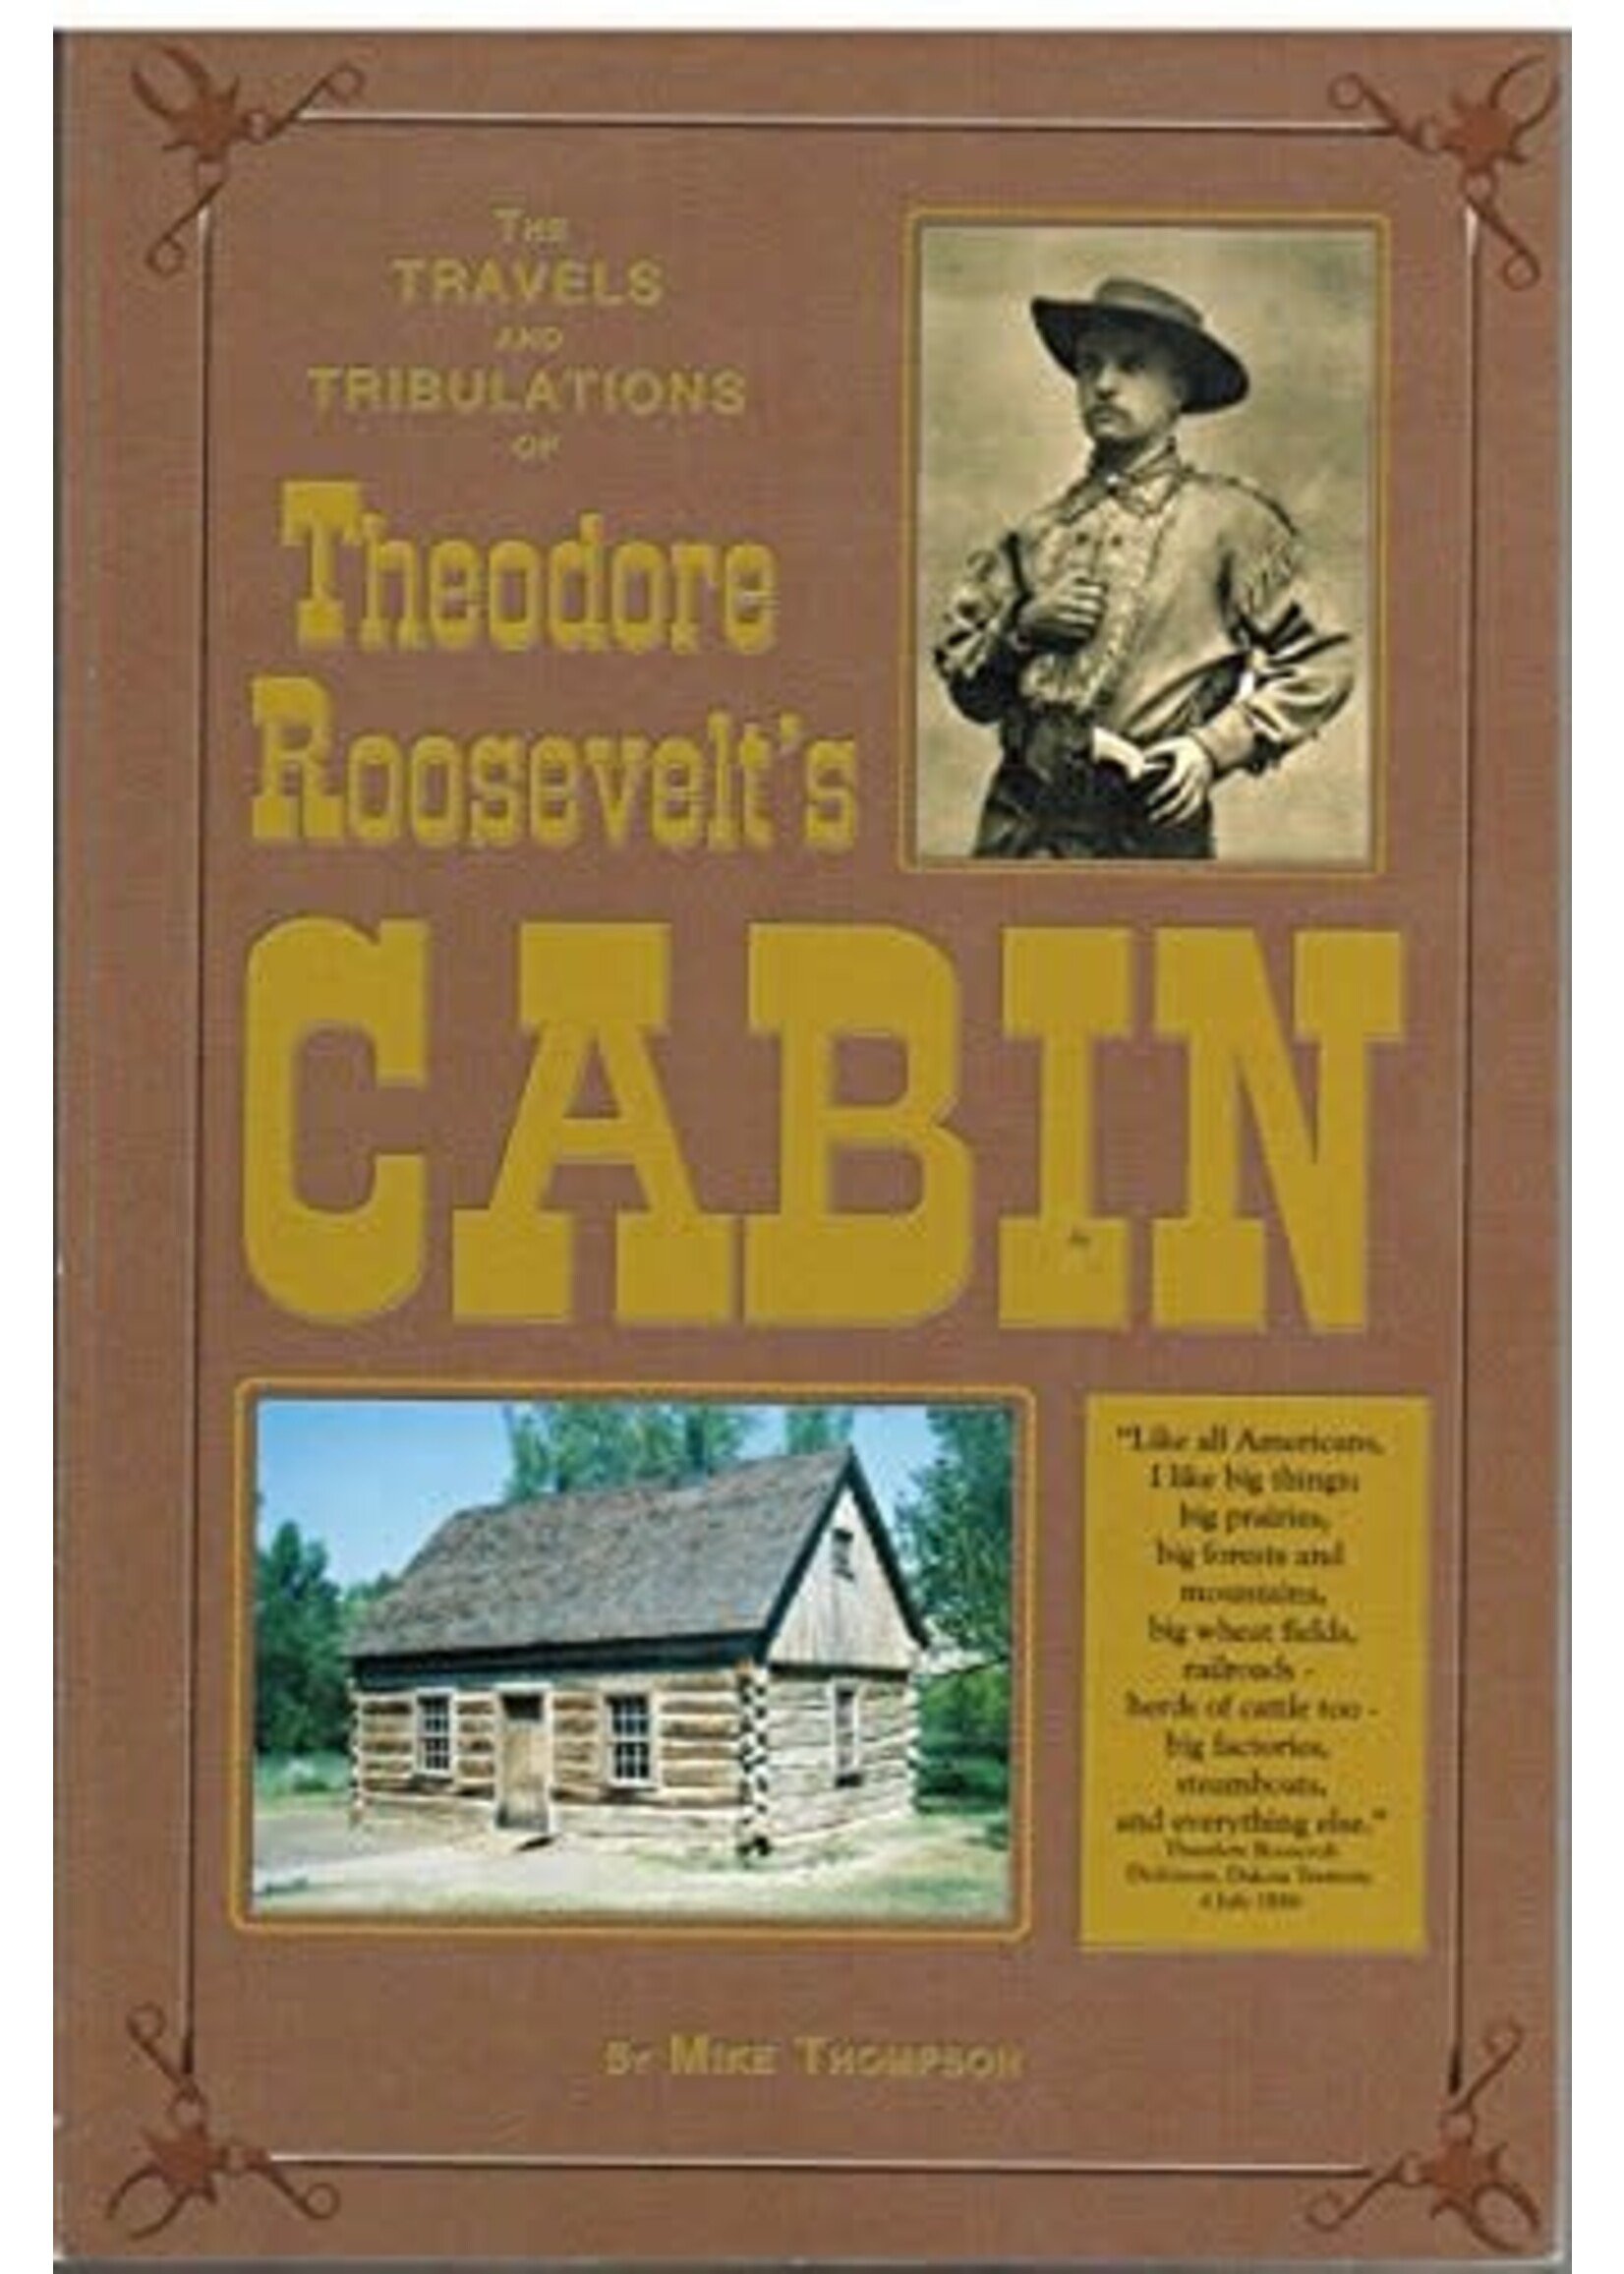 The Travels and Tribulations of Theodore Roosevelt's Cabin